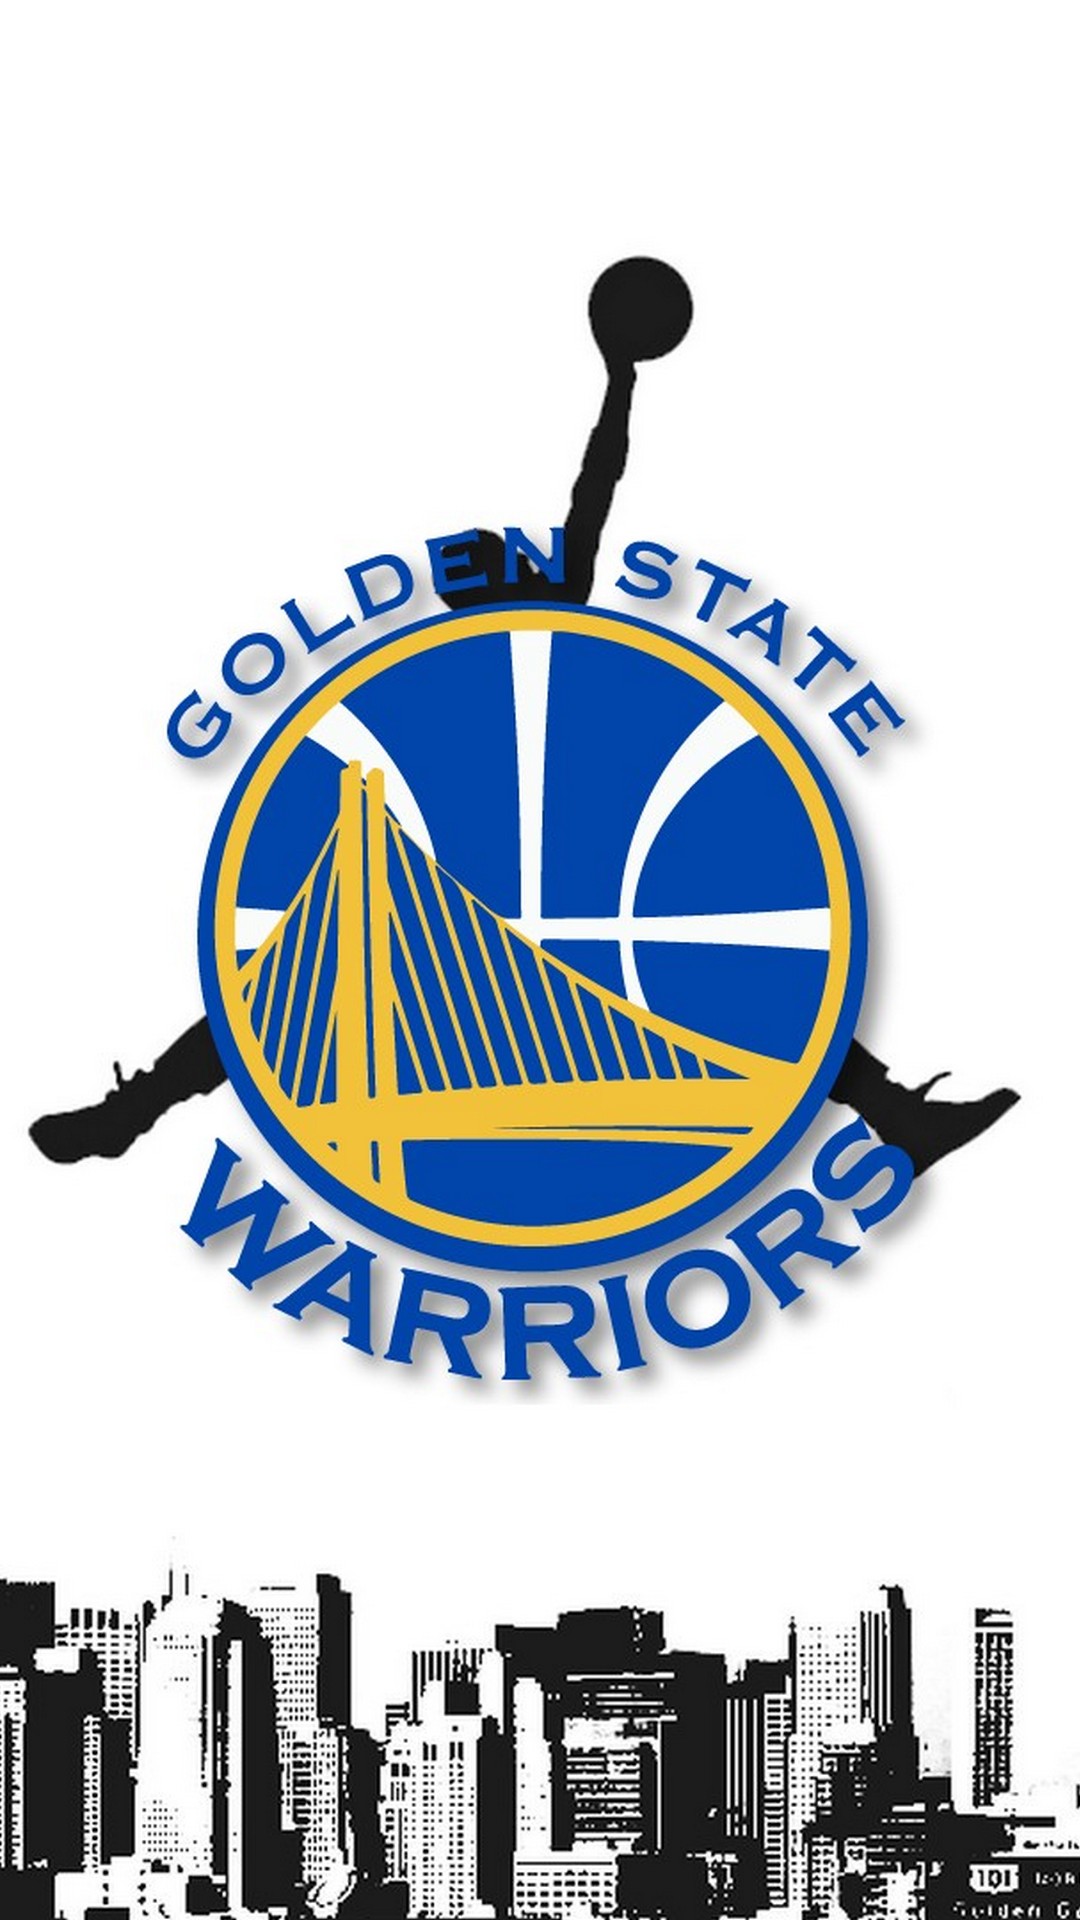 Wallpapers Phone Golden State Warriors With Image Resolution - Golden State Warriors Wallpaper 2019 - HD Wallpaper 